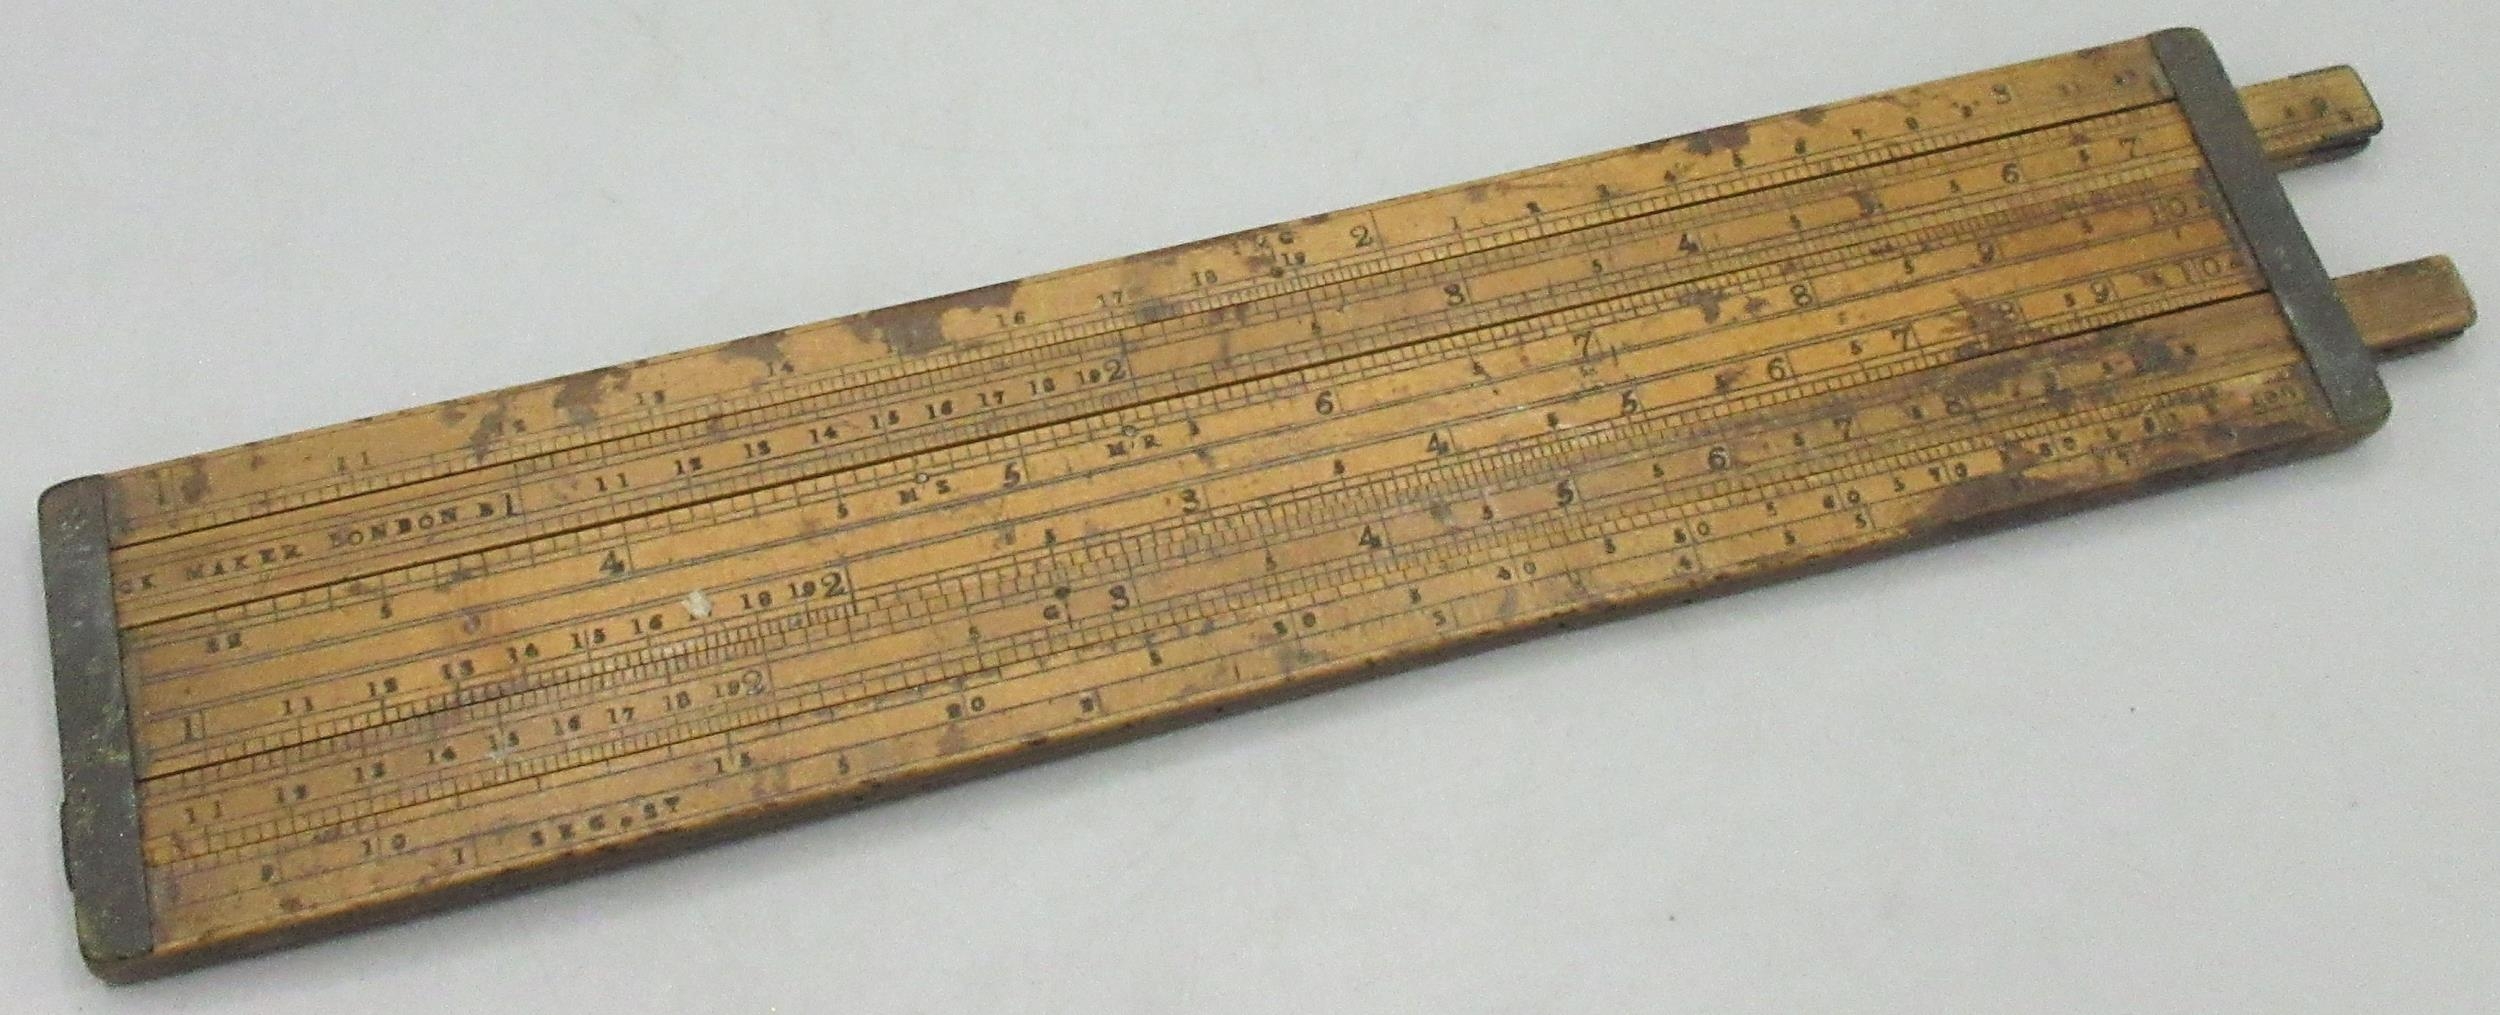 Boxwood wine and spirit trade alcohol slide rule, with two sliders to ...